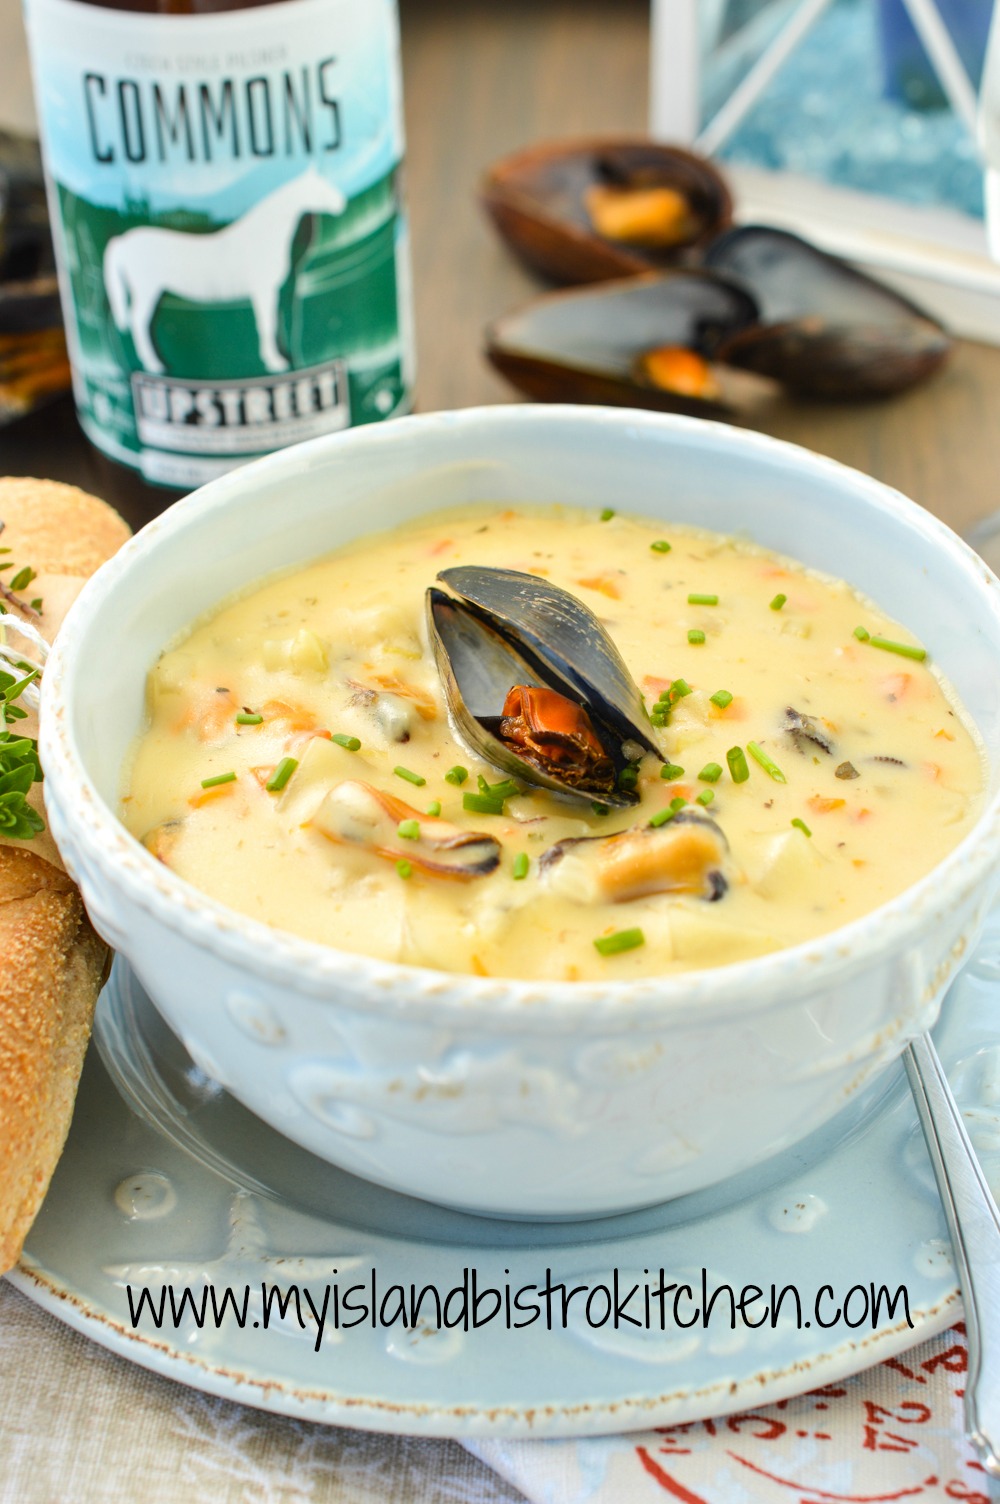 PEI Mussel Chowder Paired with Upstreet Brewing Company's Commons Czech Style Pilsner